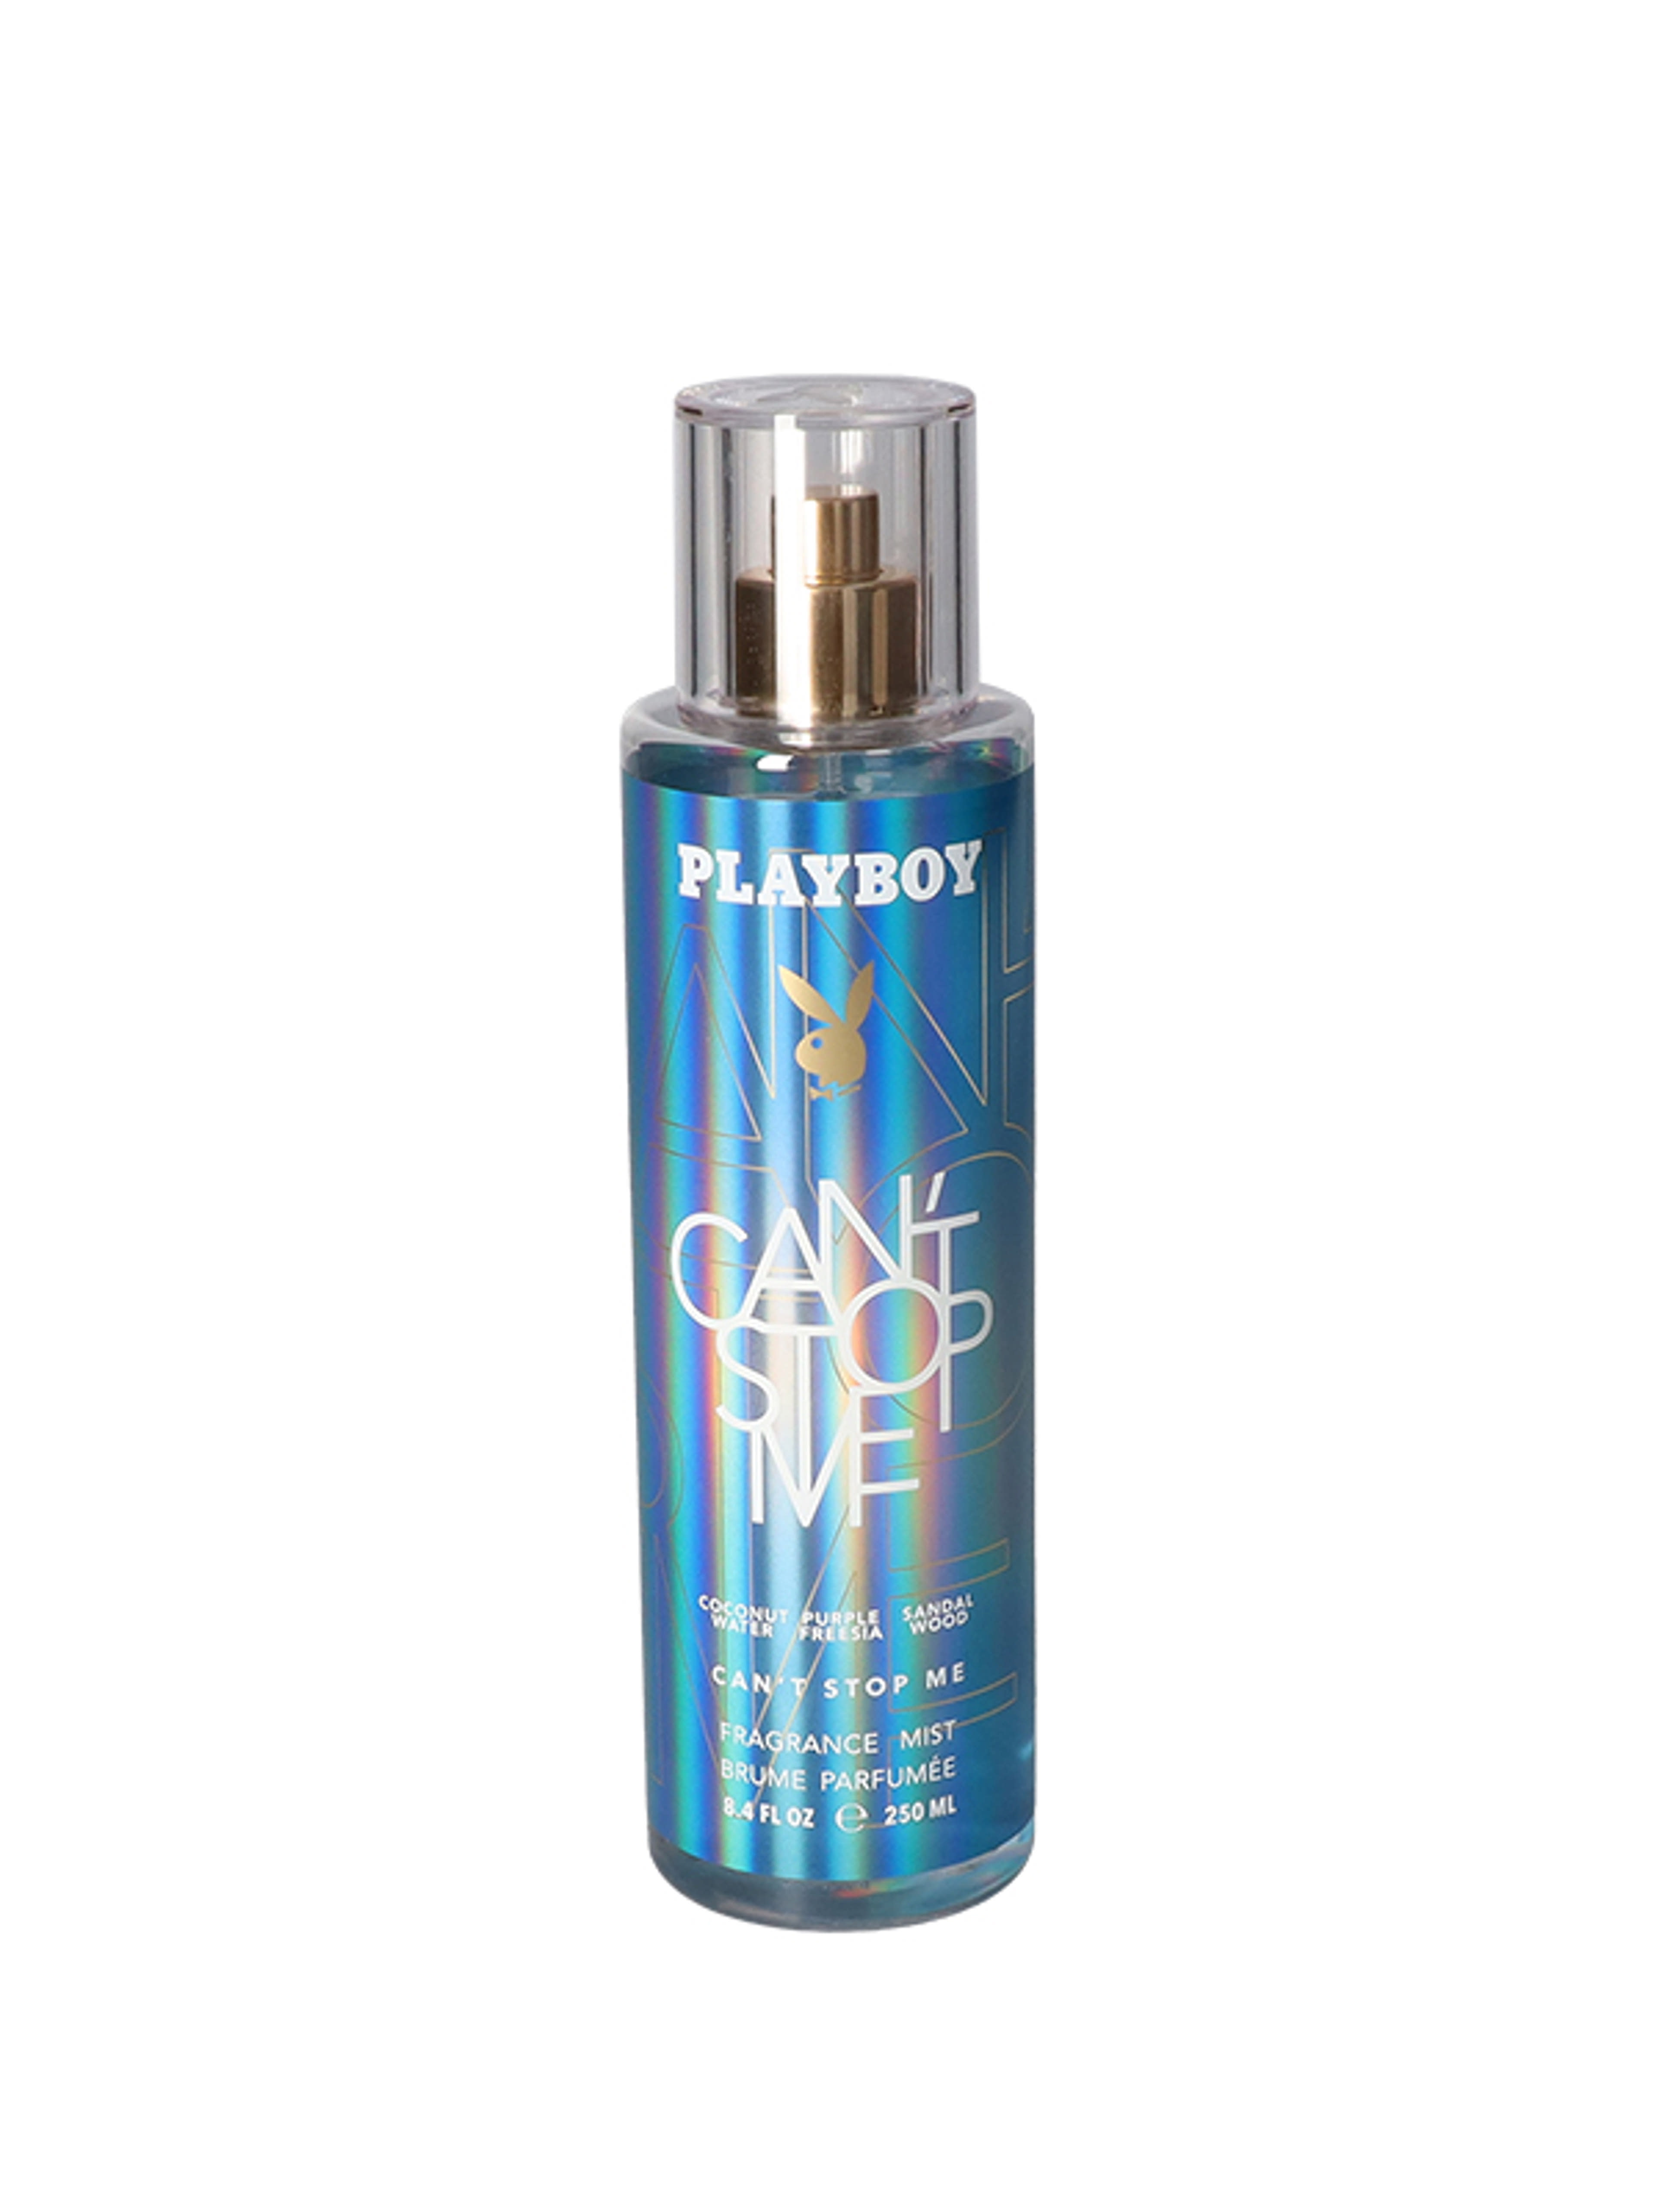 Playboy cant stop me body mist - 250 ml-3